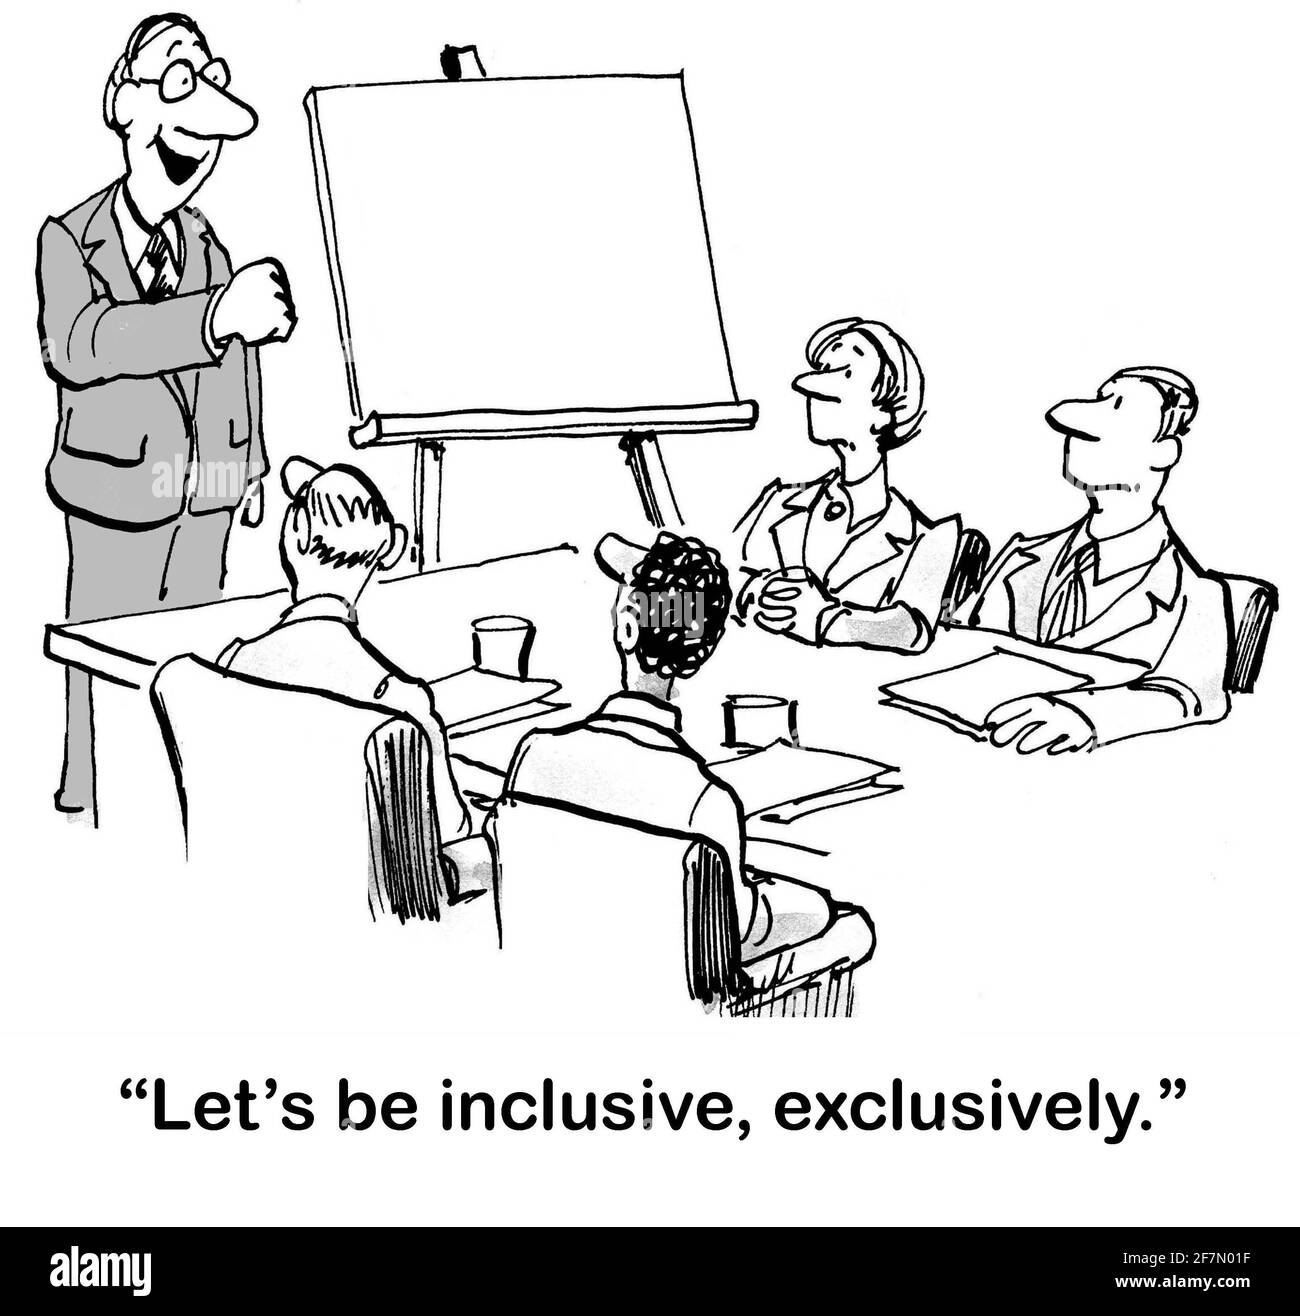 Executive urges more inclusion among team. Stock Photo